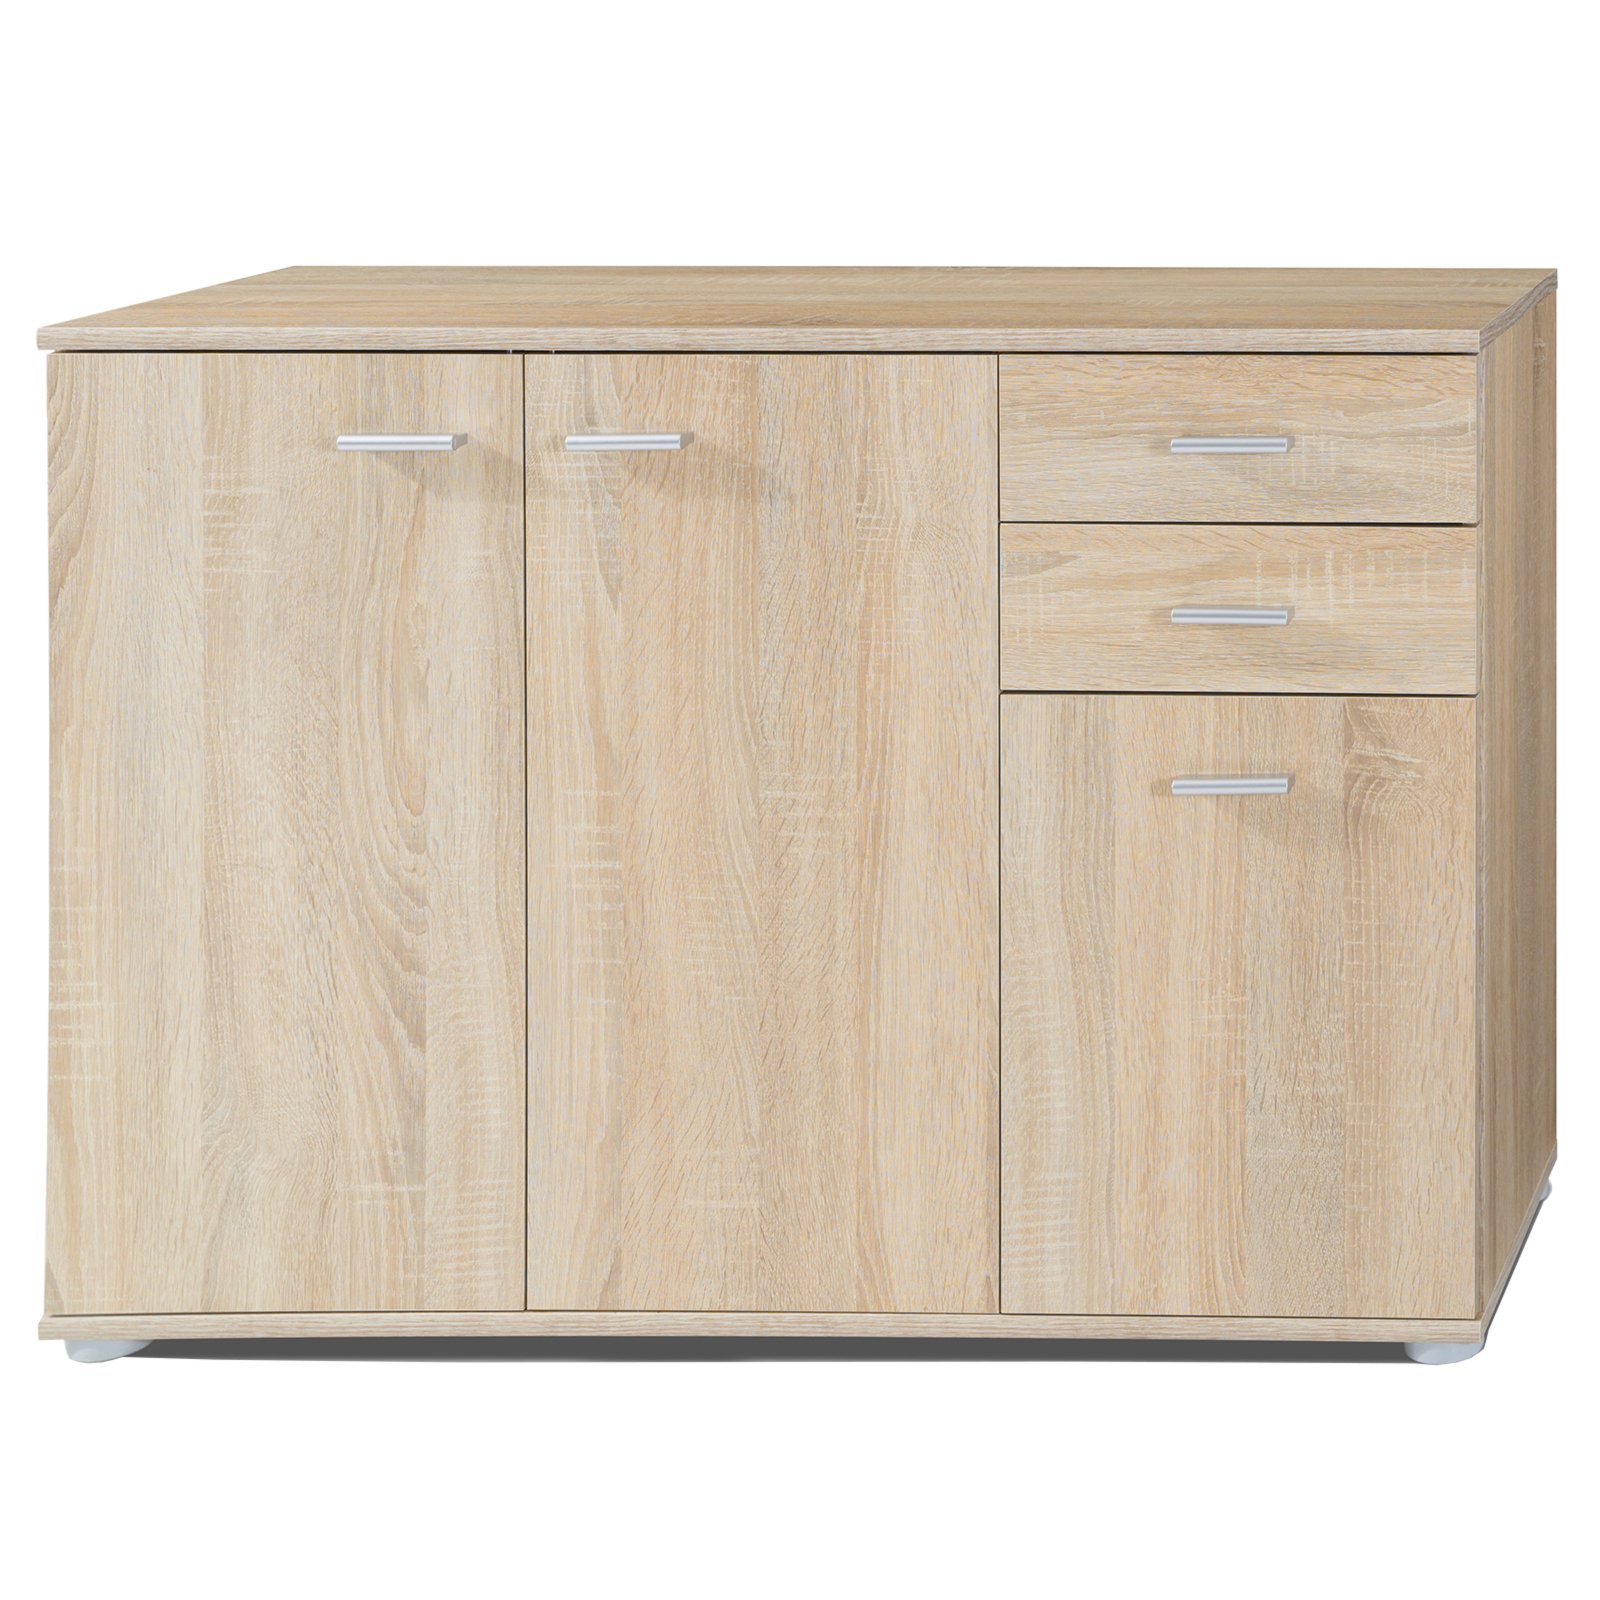 Kommode MIKE 1  Sonoma Eiche  106 cm  Kommoden  Sideboards  M bel  